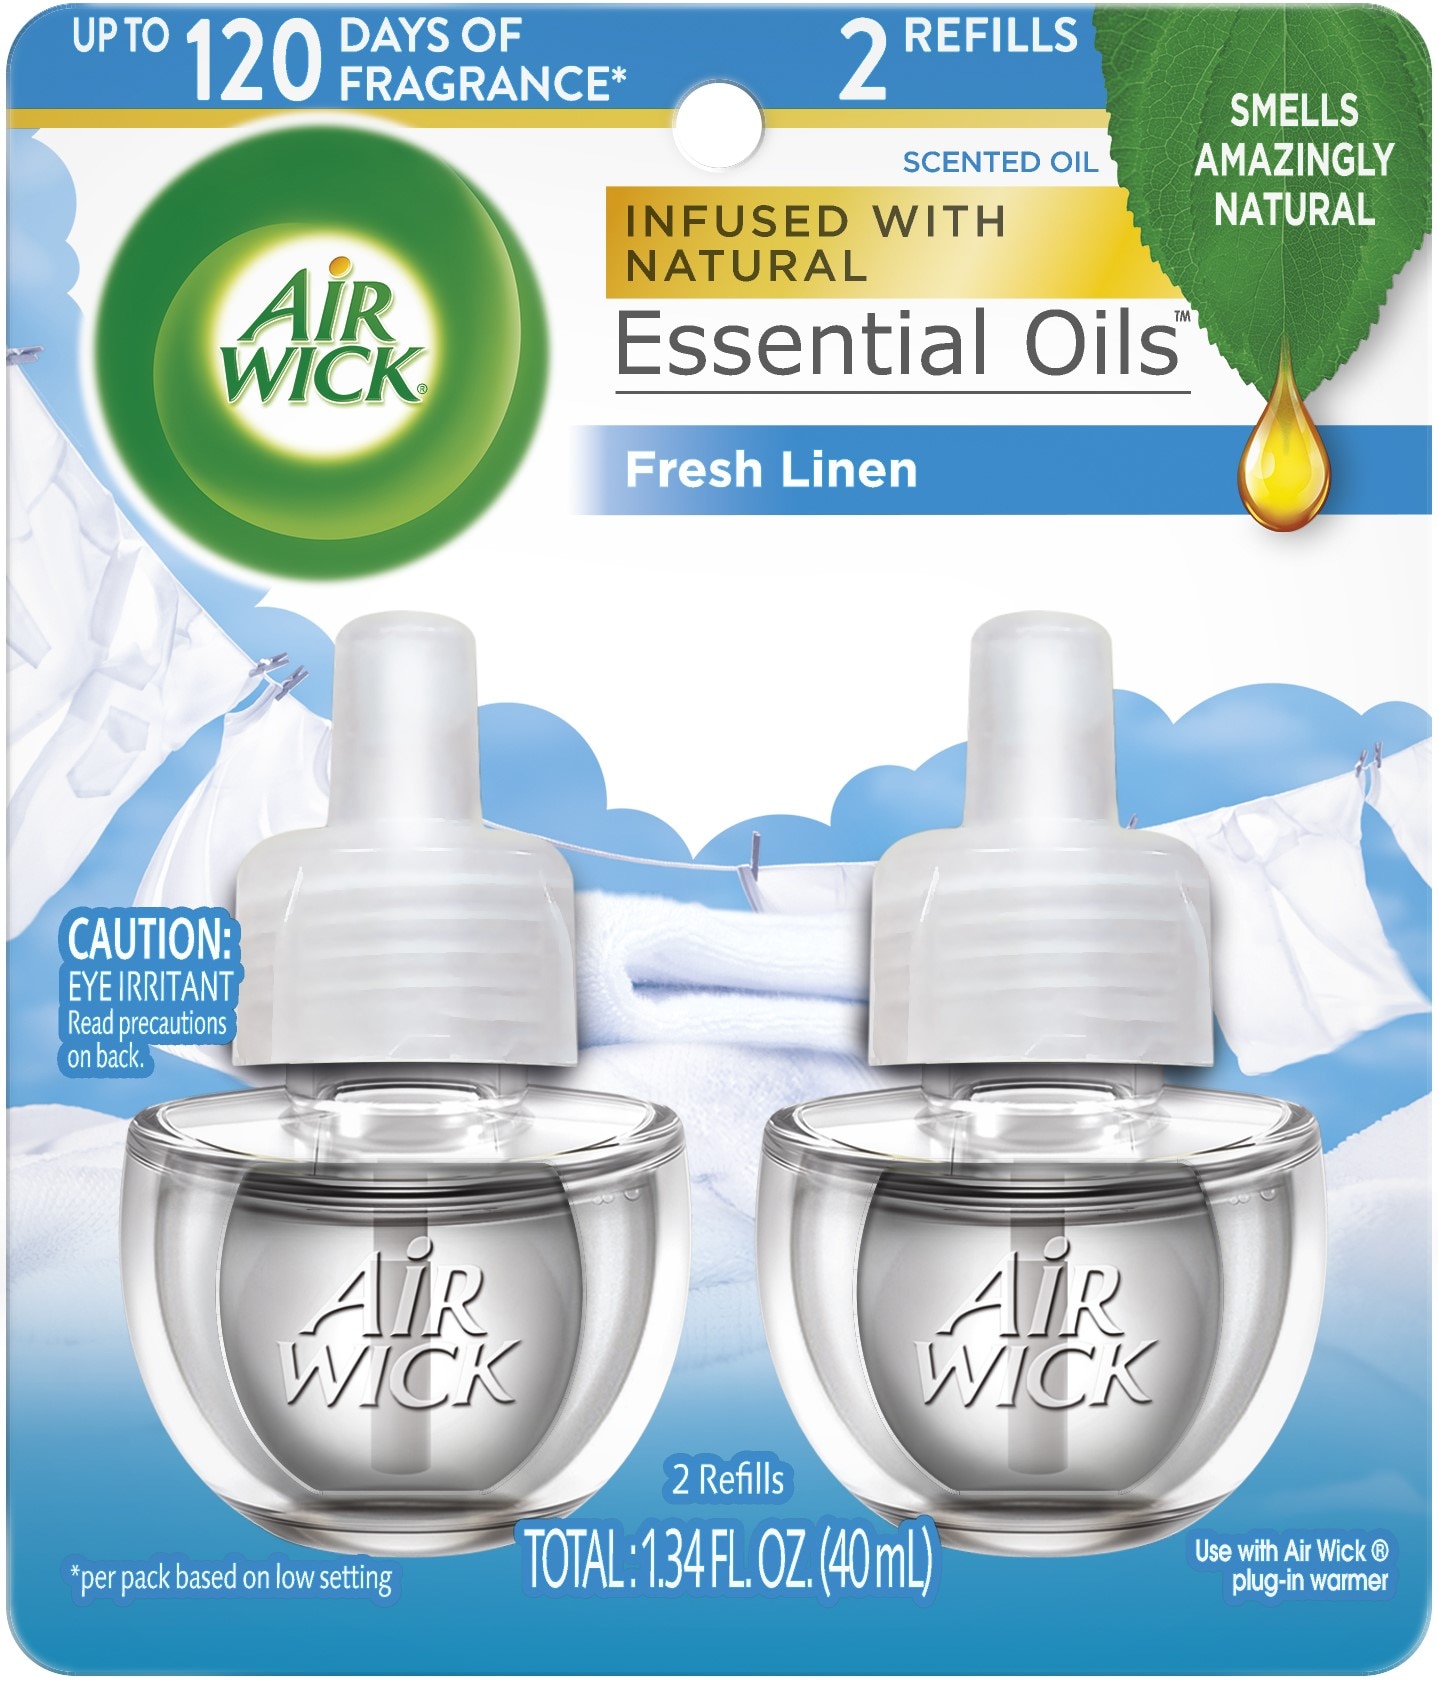 AIR WICK® Scented Oil - Fresh Linen (Discontinued)